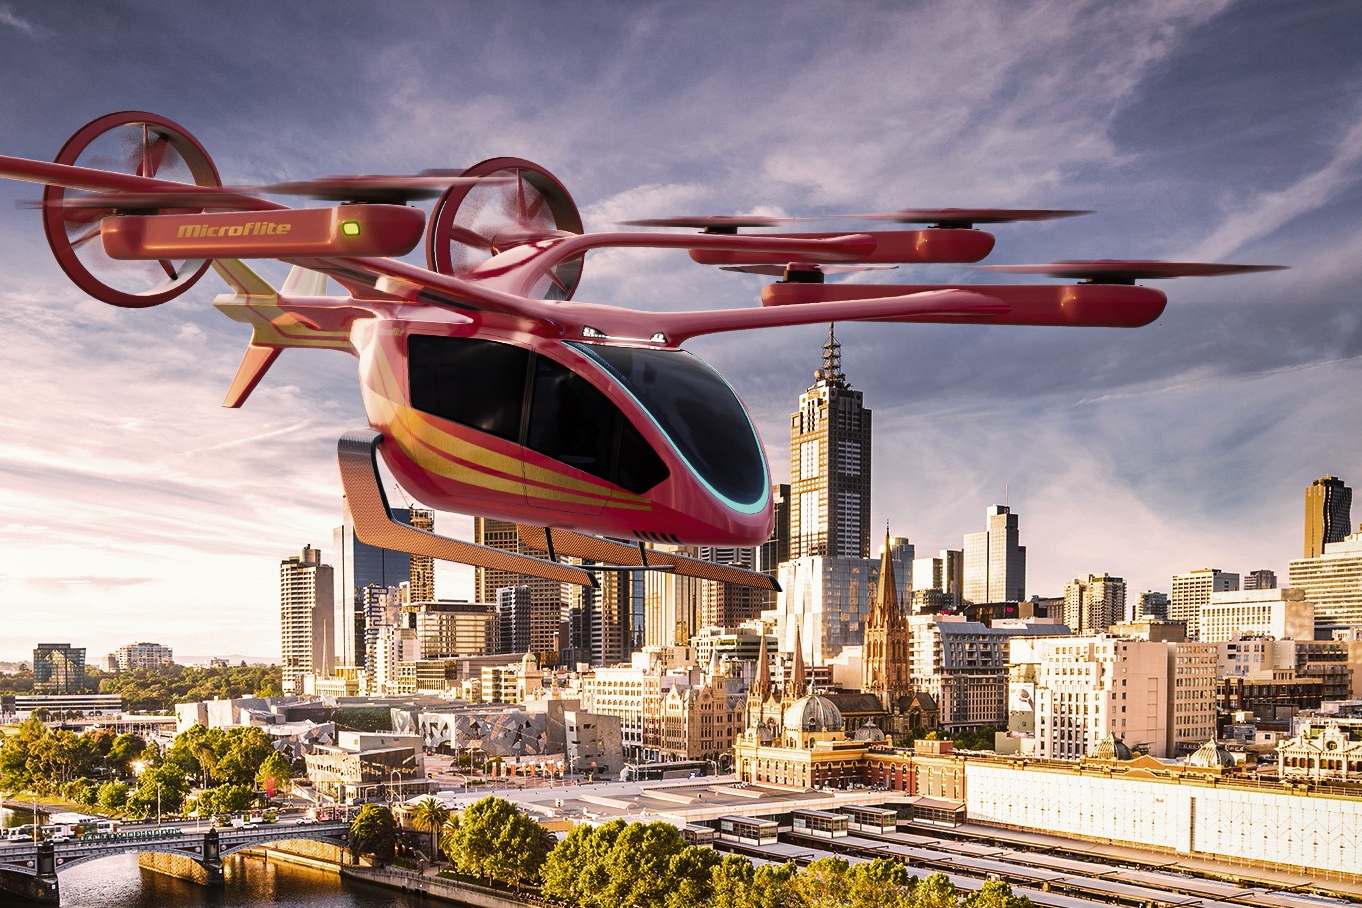 Eve Urban Air Mobility has partnered Microflite, an Australia-based helicopter operator. The two companies believe that by working together they can lay the foundation for urban air mobility operations in Australia, perhaps even as early as 2026. Click to enlarge.